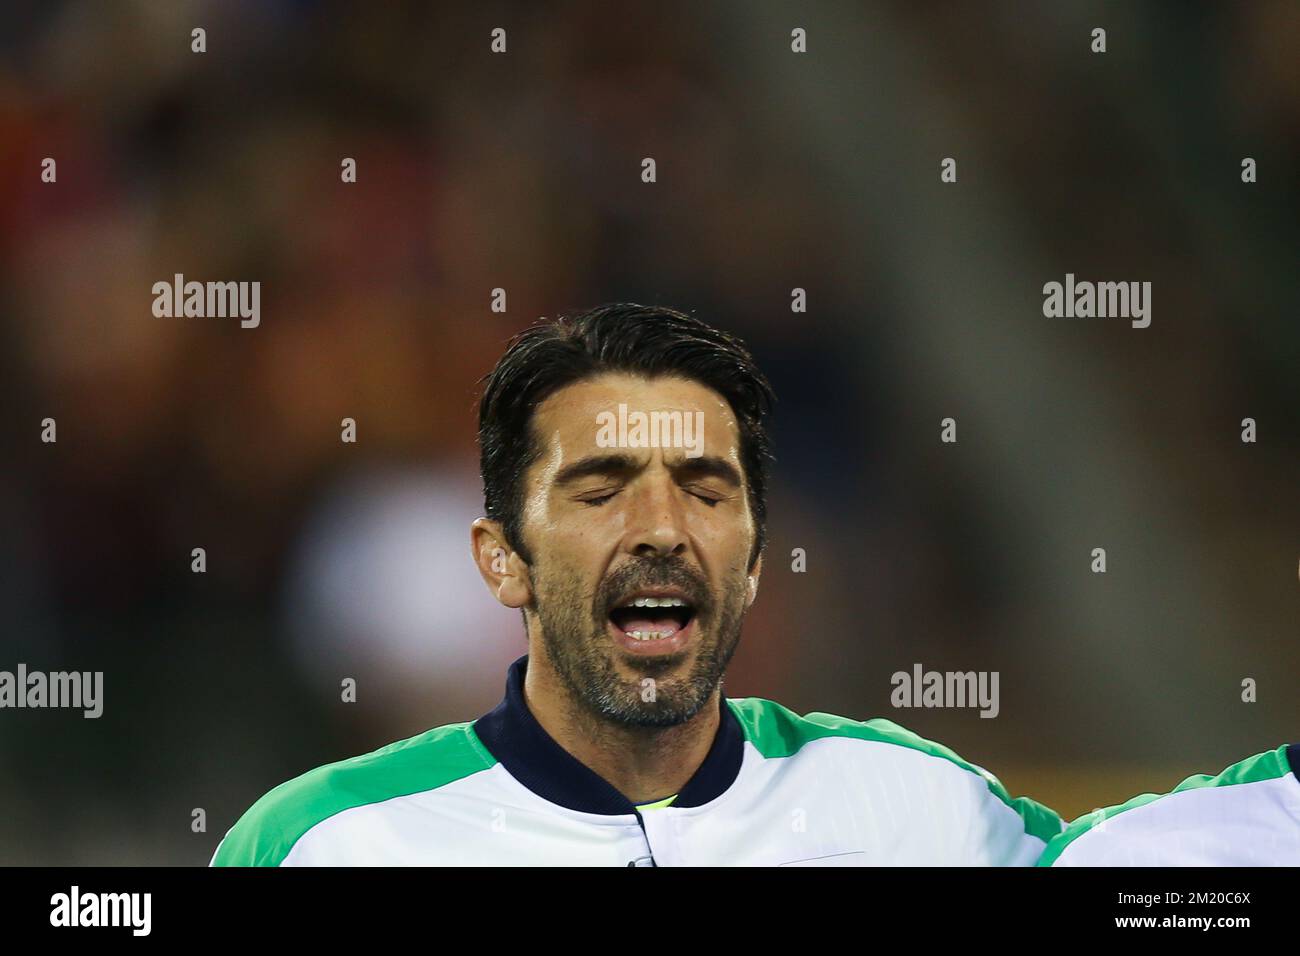 20151113 - BRUSSELS, BELGIUM: Italy's goalkeeper Gianluigi Buffon pictured at the start of a friendly soccer game between Belgian national team Red Devils and Italy, in Brussels, Friday 13 November 2015, a game in preparation of the Euro2016 European Championship. BELGA PHOTO BRUNO FAHY Stock Photo